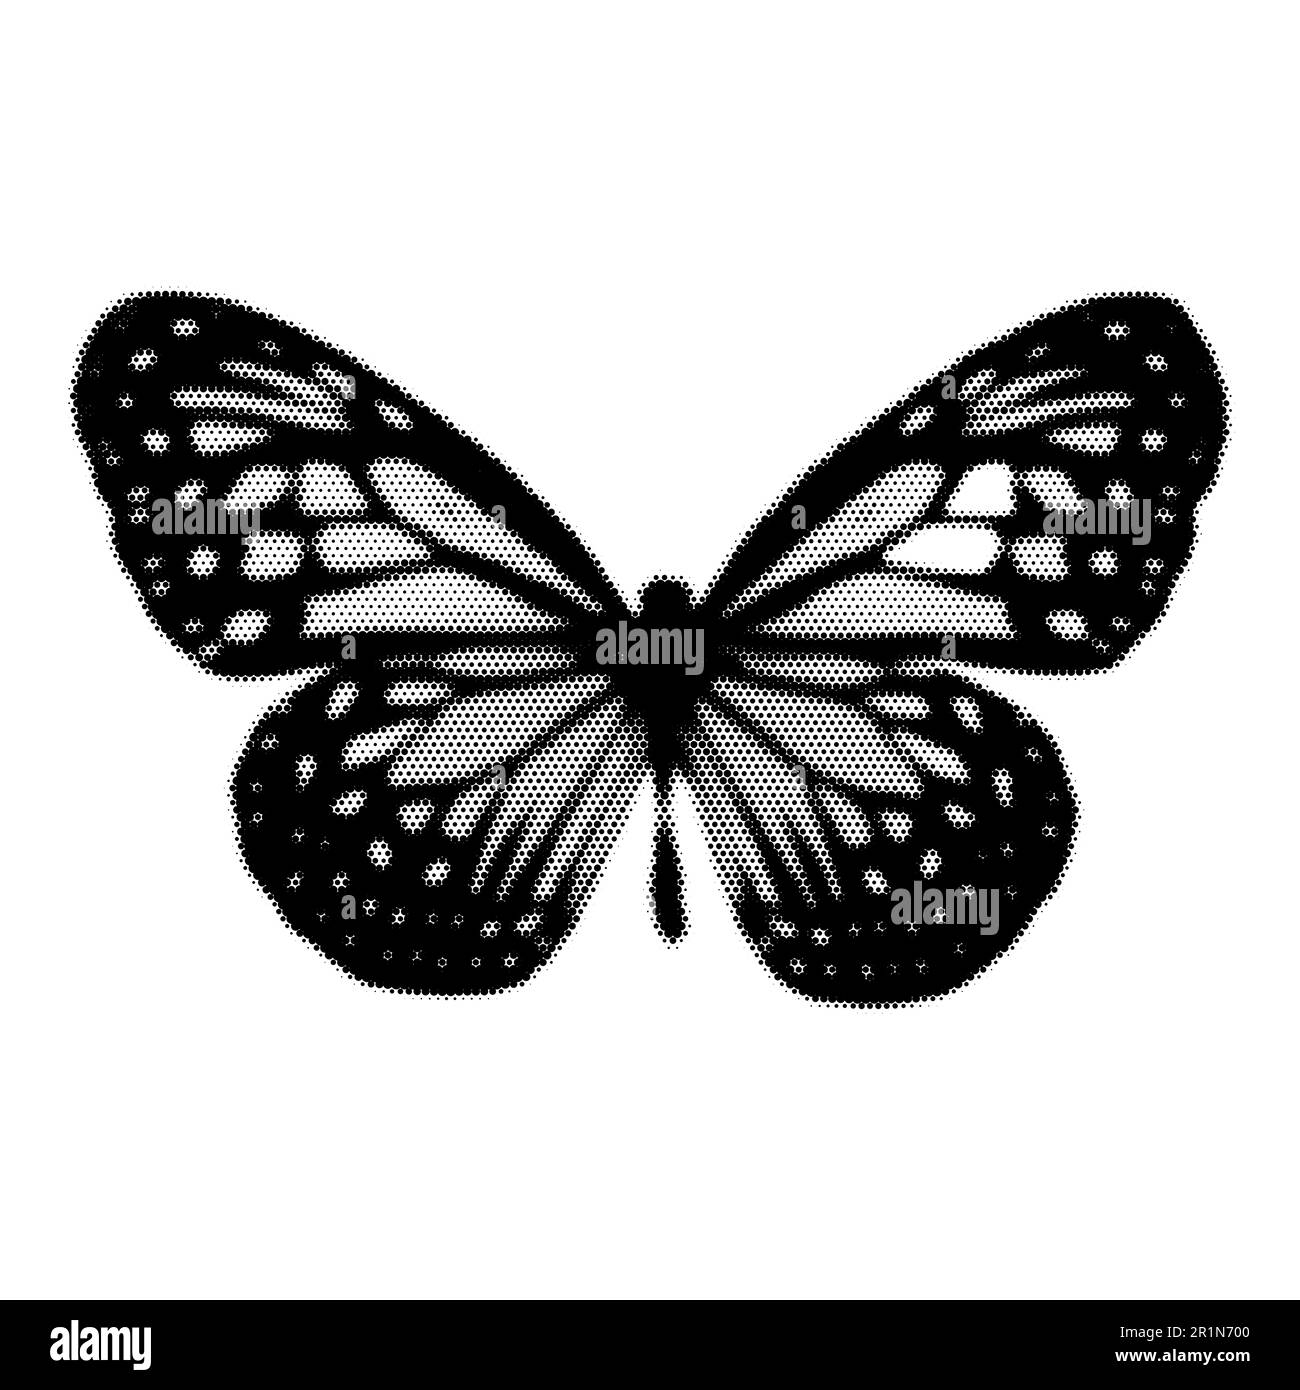 Halftone butterfly. Collage design element in trendy magazine style. Vector illustration with vintage grunge punk cutout shape Stock Vector